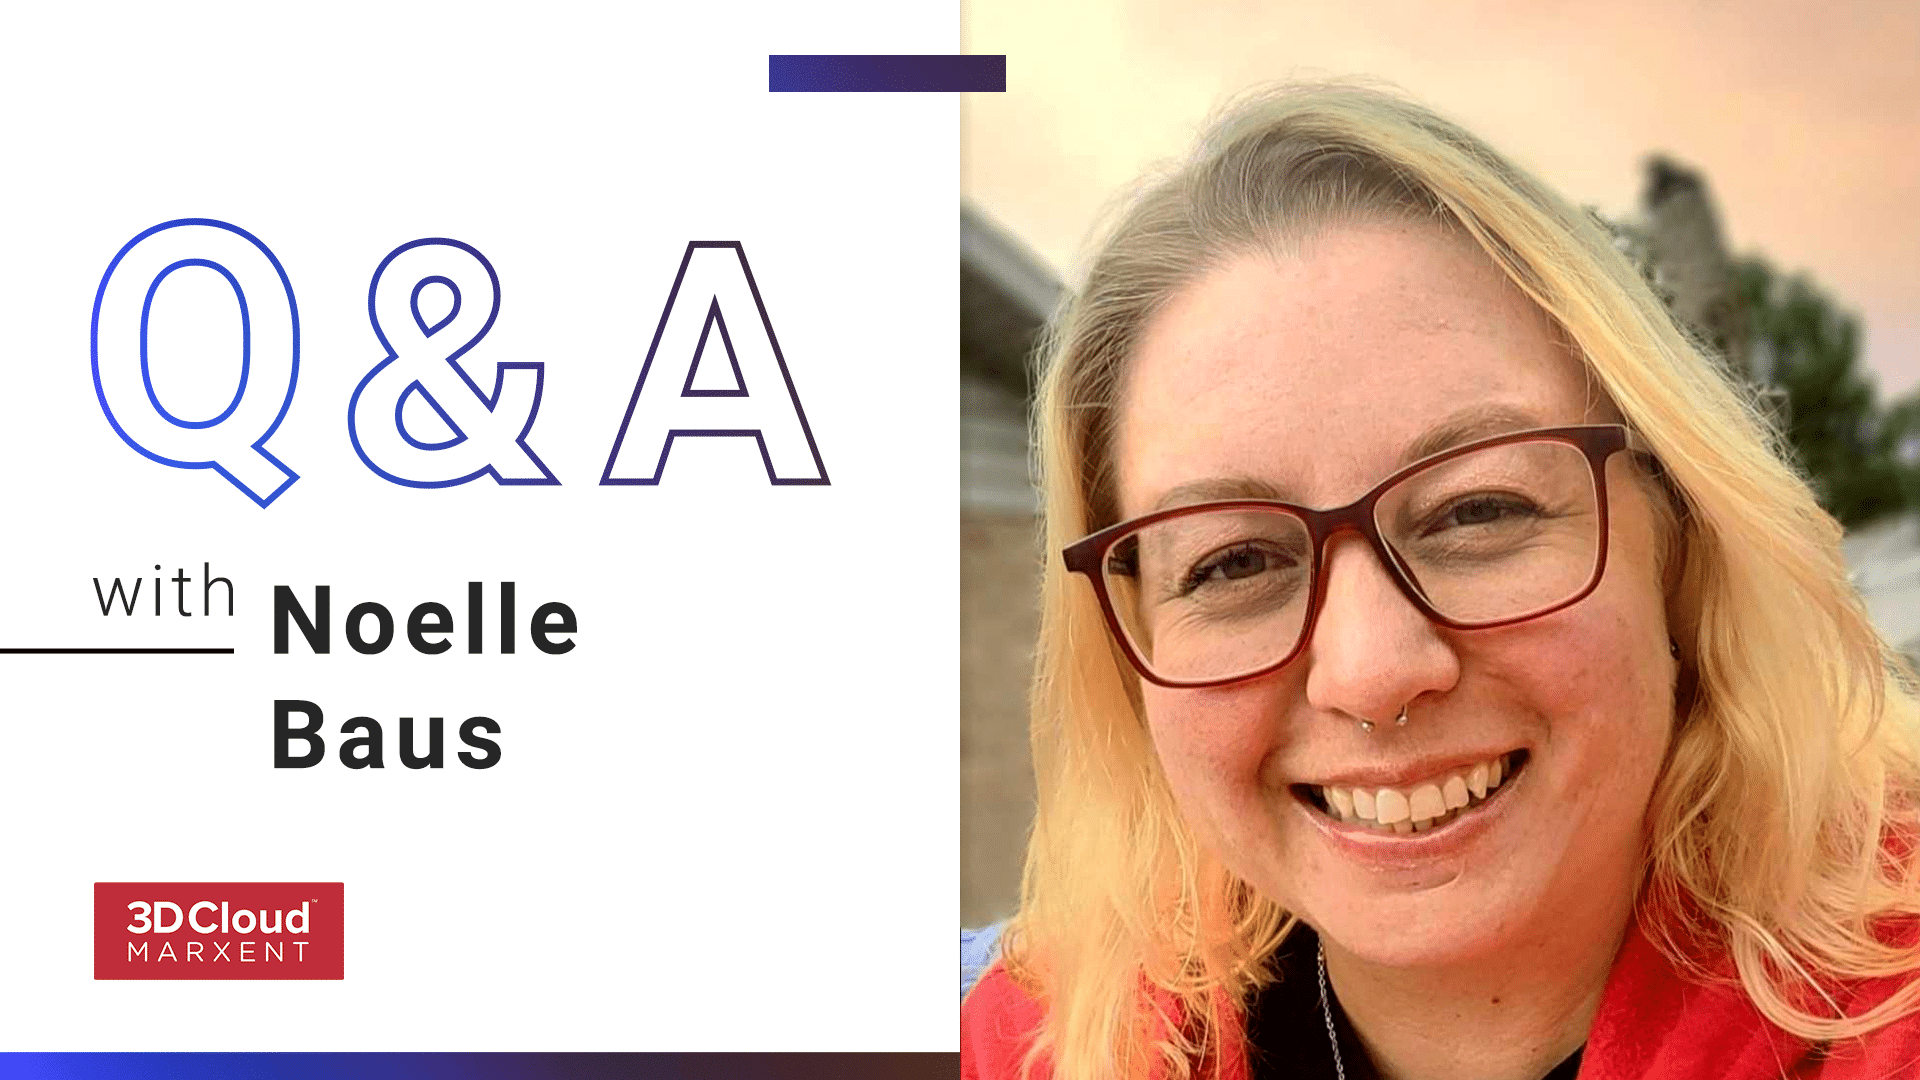 Employee Q&A with Noelle Baus